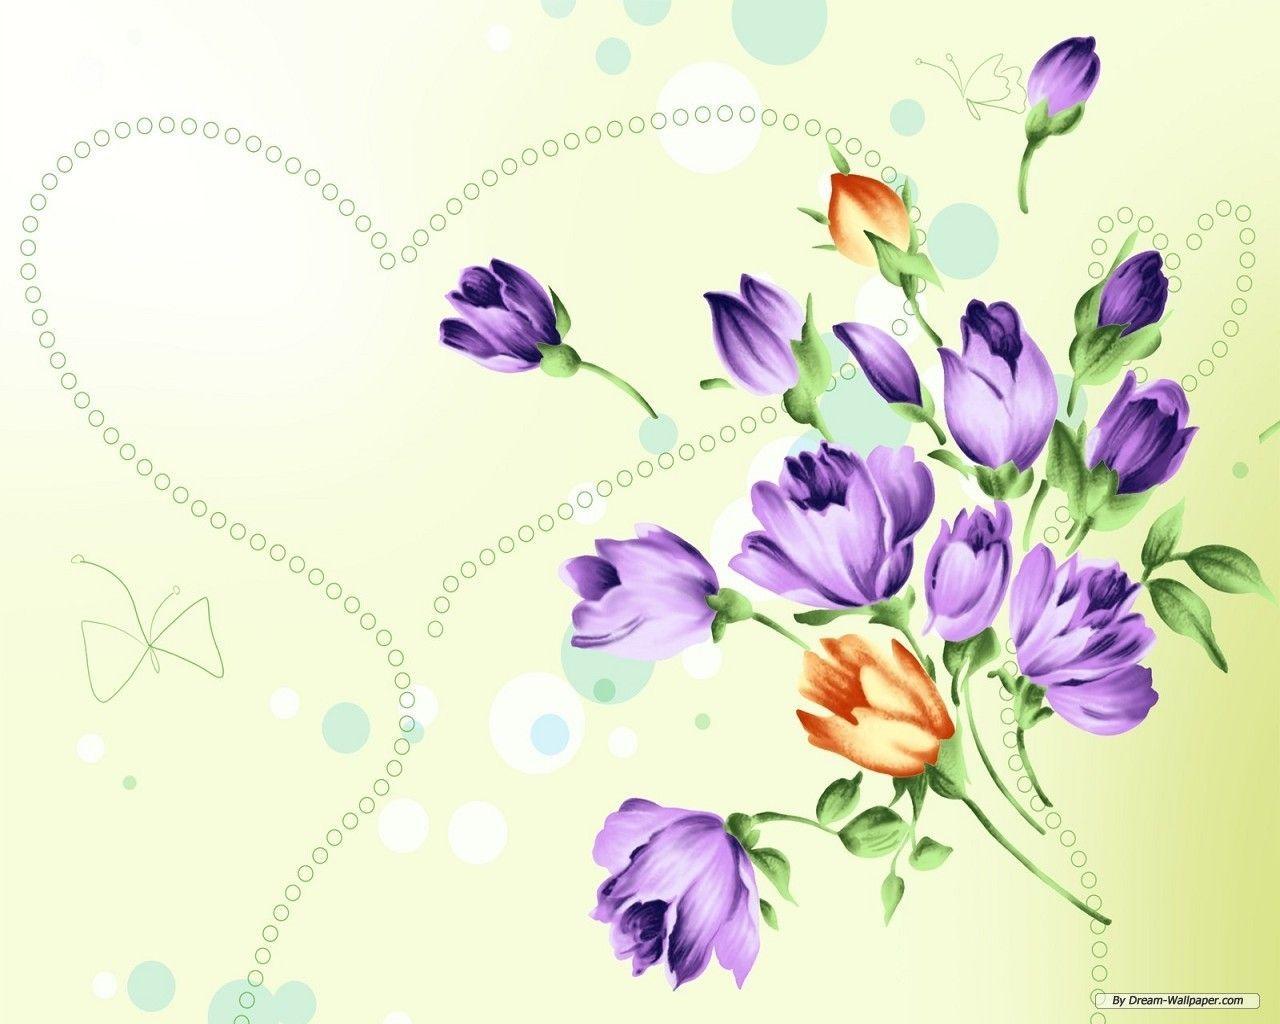 Artistic Flower Wallpapers - Top Free Artistic Flower Backgrounds ...